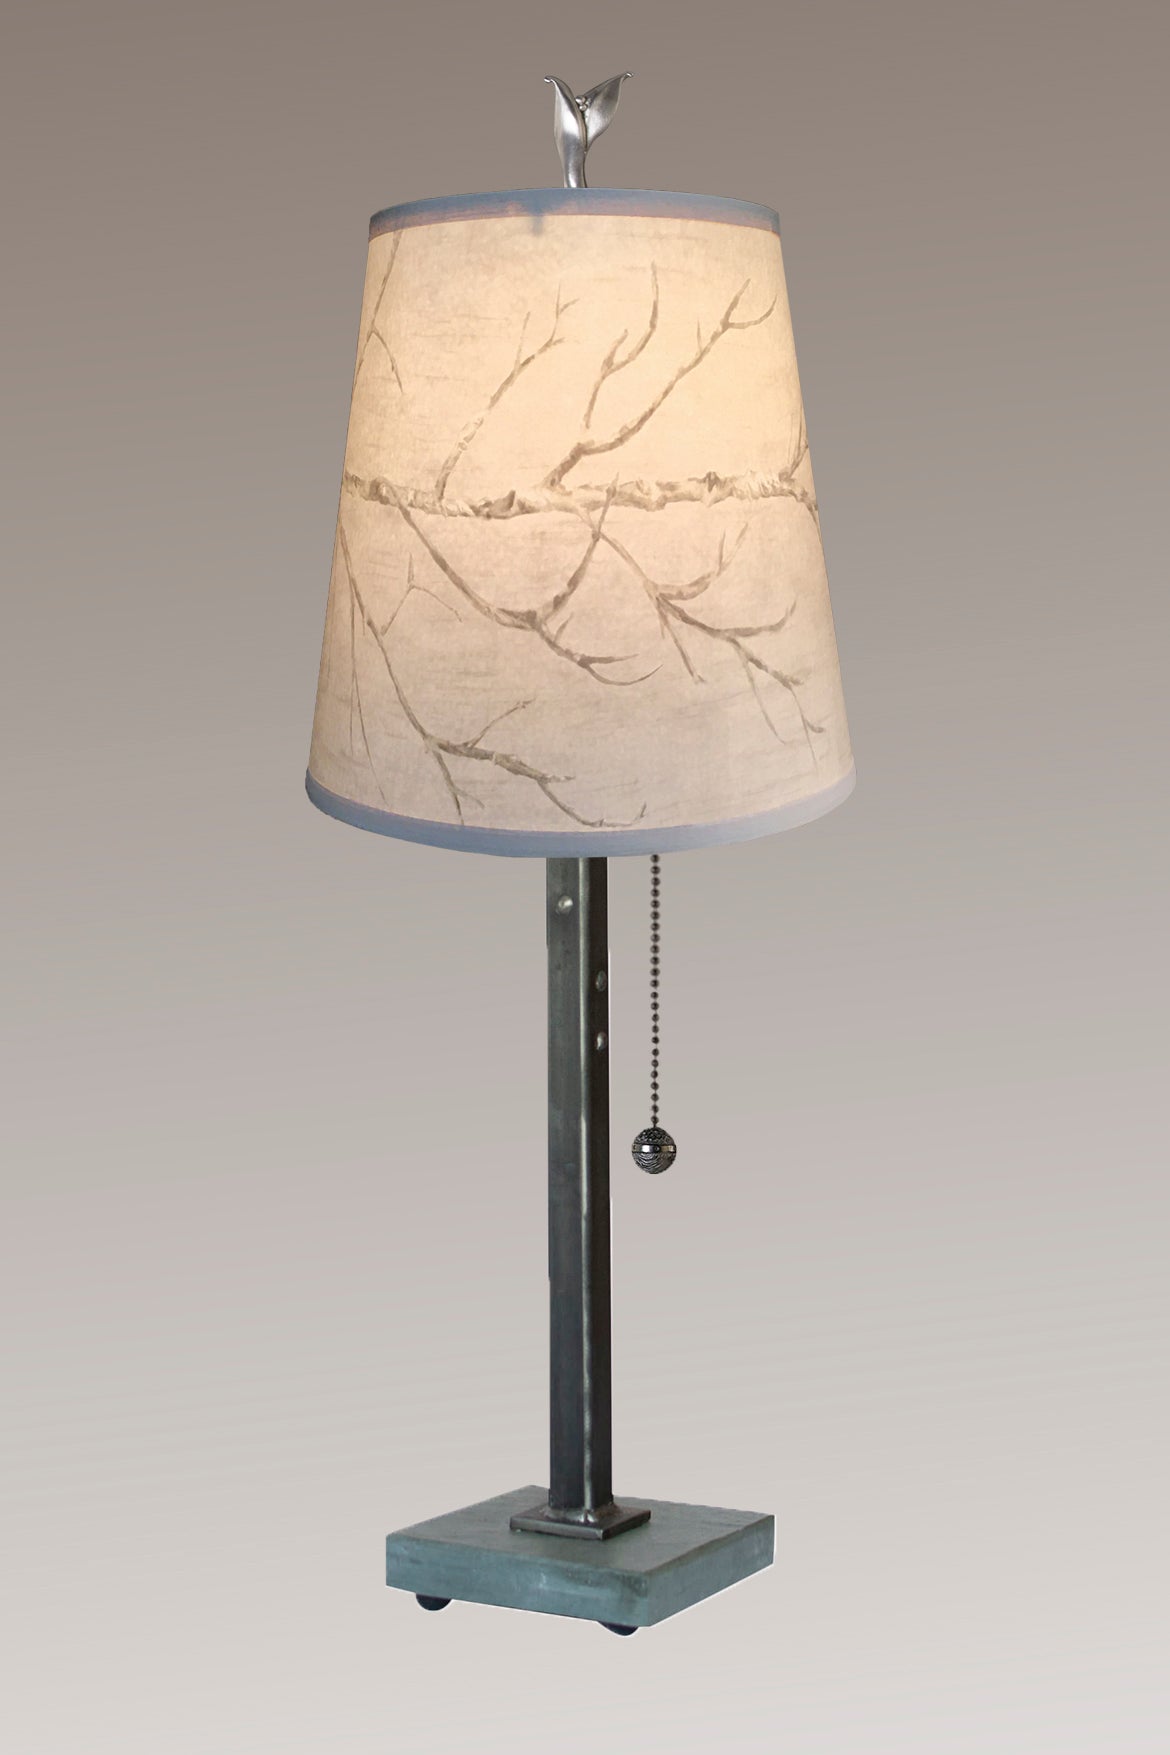 Janna Ugone &amp; Co Table Lamps Steel Table Lamp with Small Drum Shade in Sweeping Branch